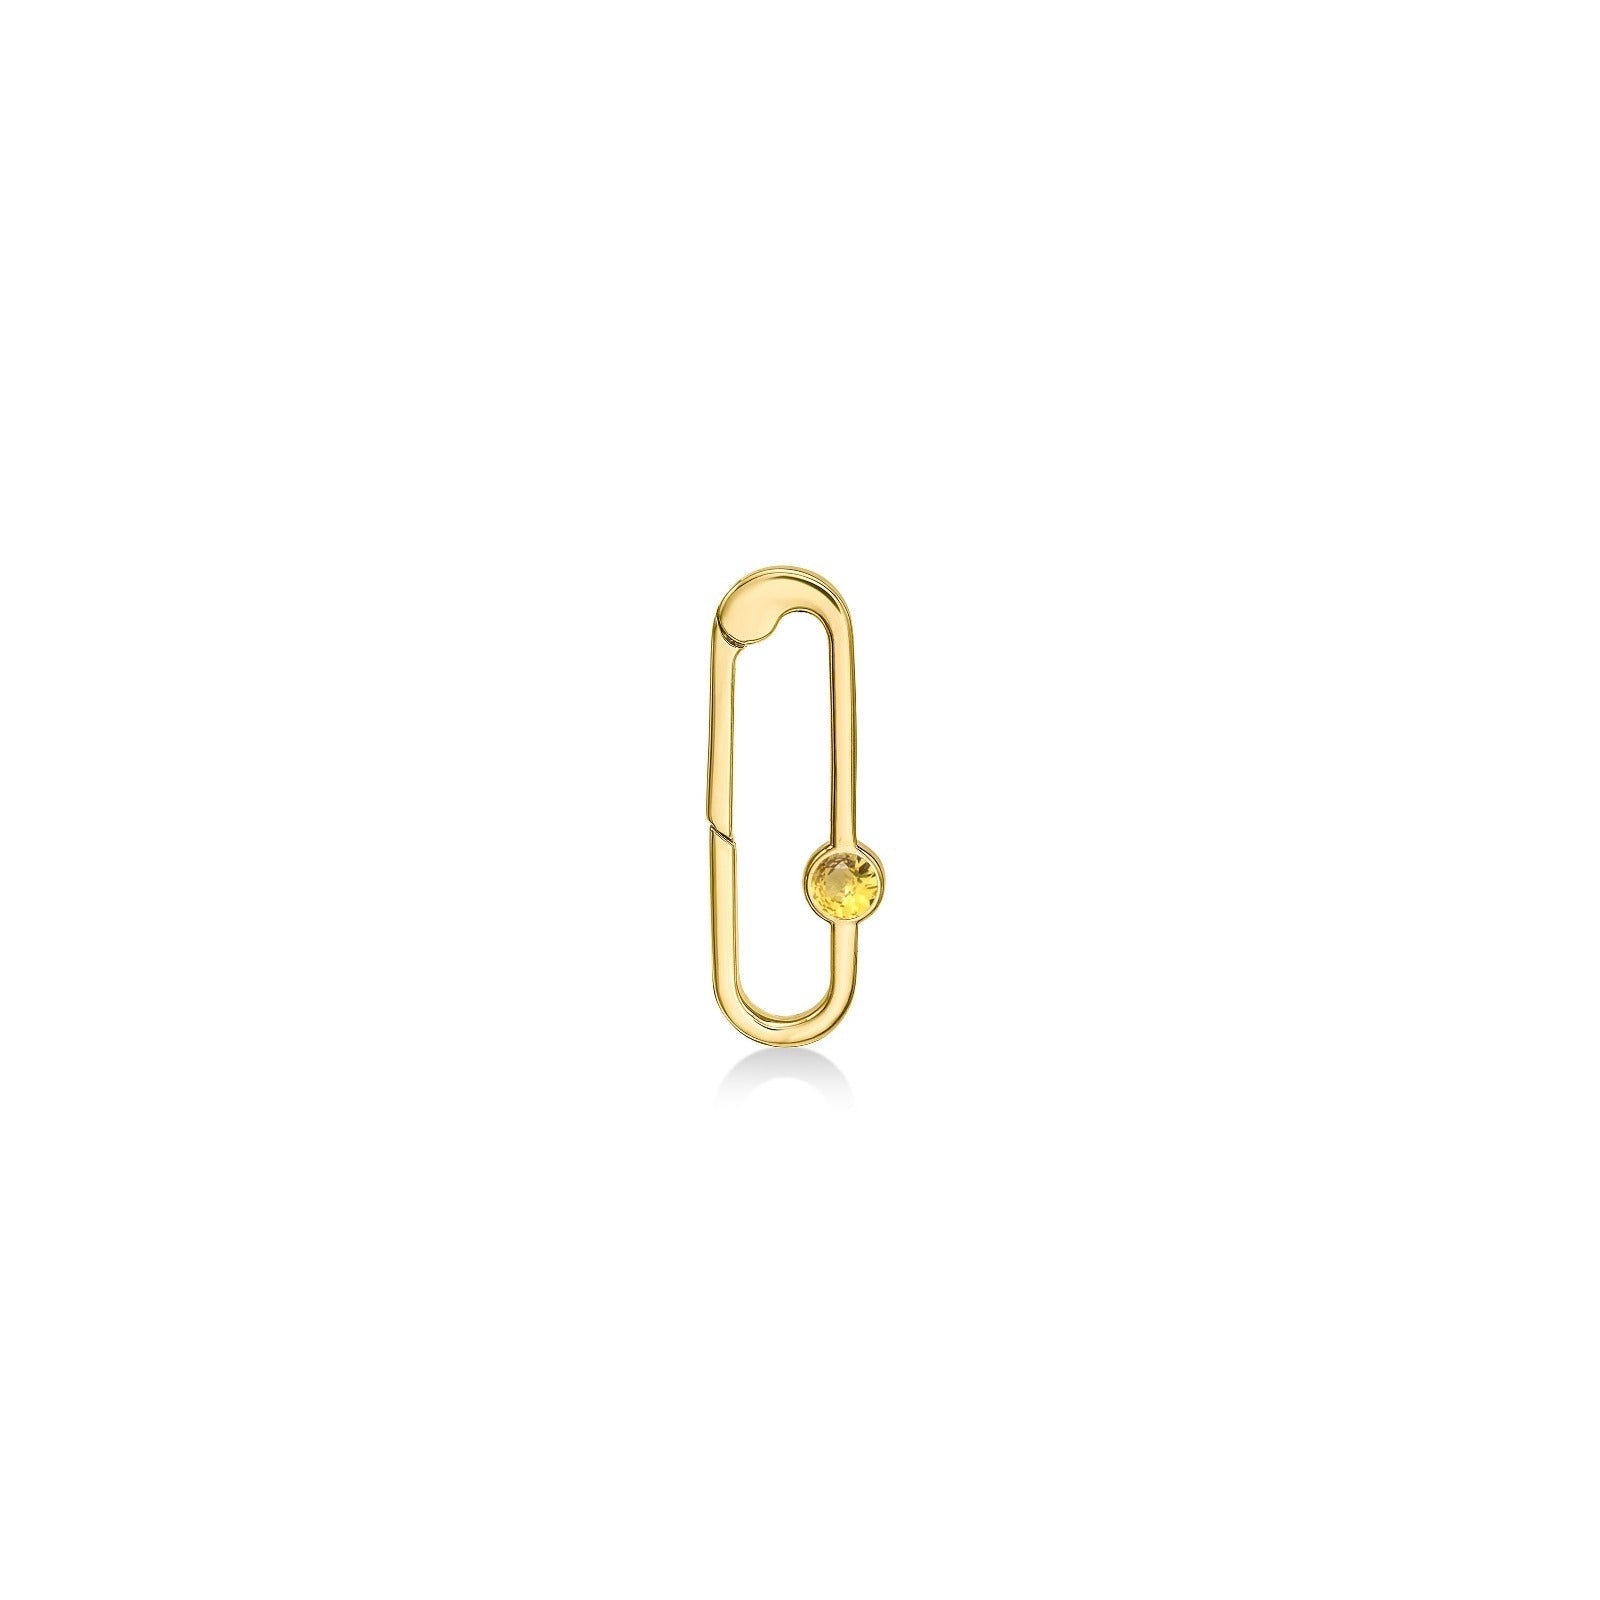 14k gold paperclip charm lock with yellow topaz